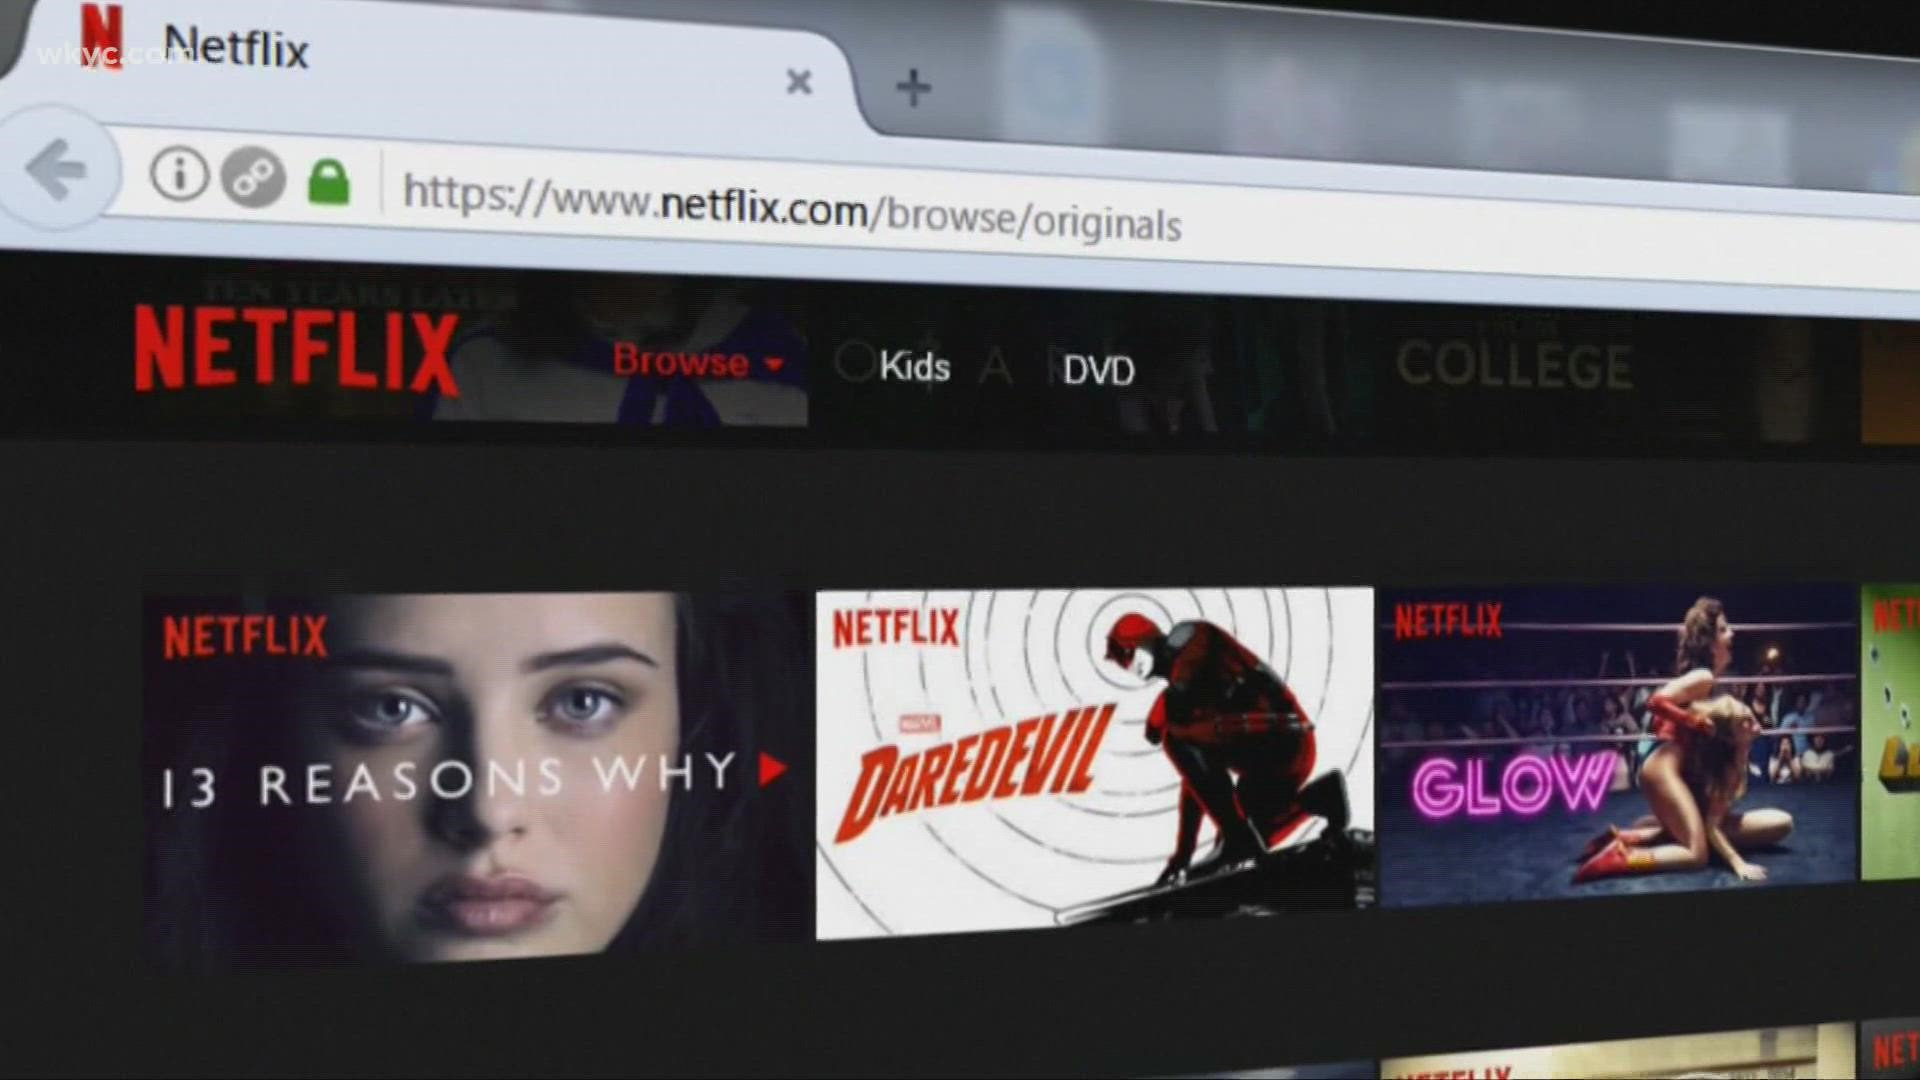 Netflix is testing a feature that charges a fee for password sharing, but it’s only happening in Chile, Costa Rica and Peru — not in the United States.